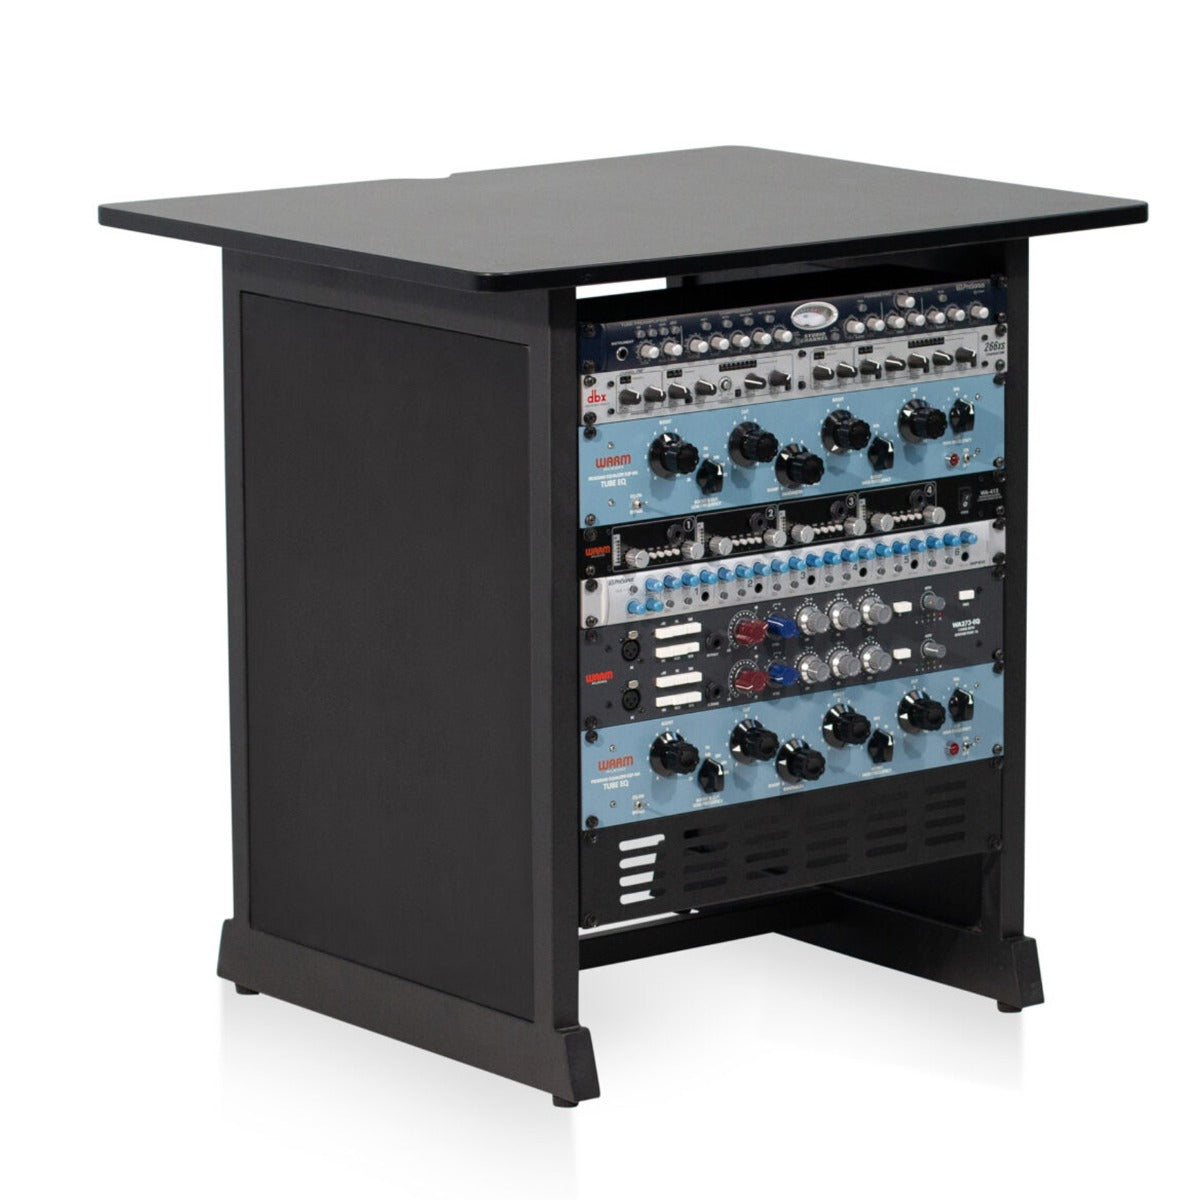 Angled image of the 12U rack cabinet filled with  rack gear.  